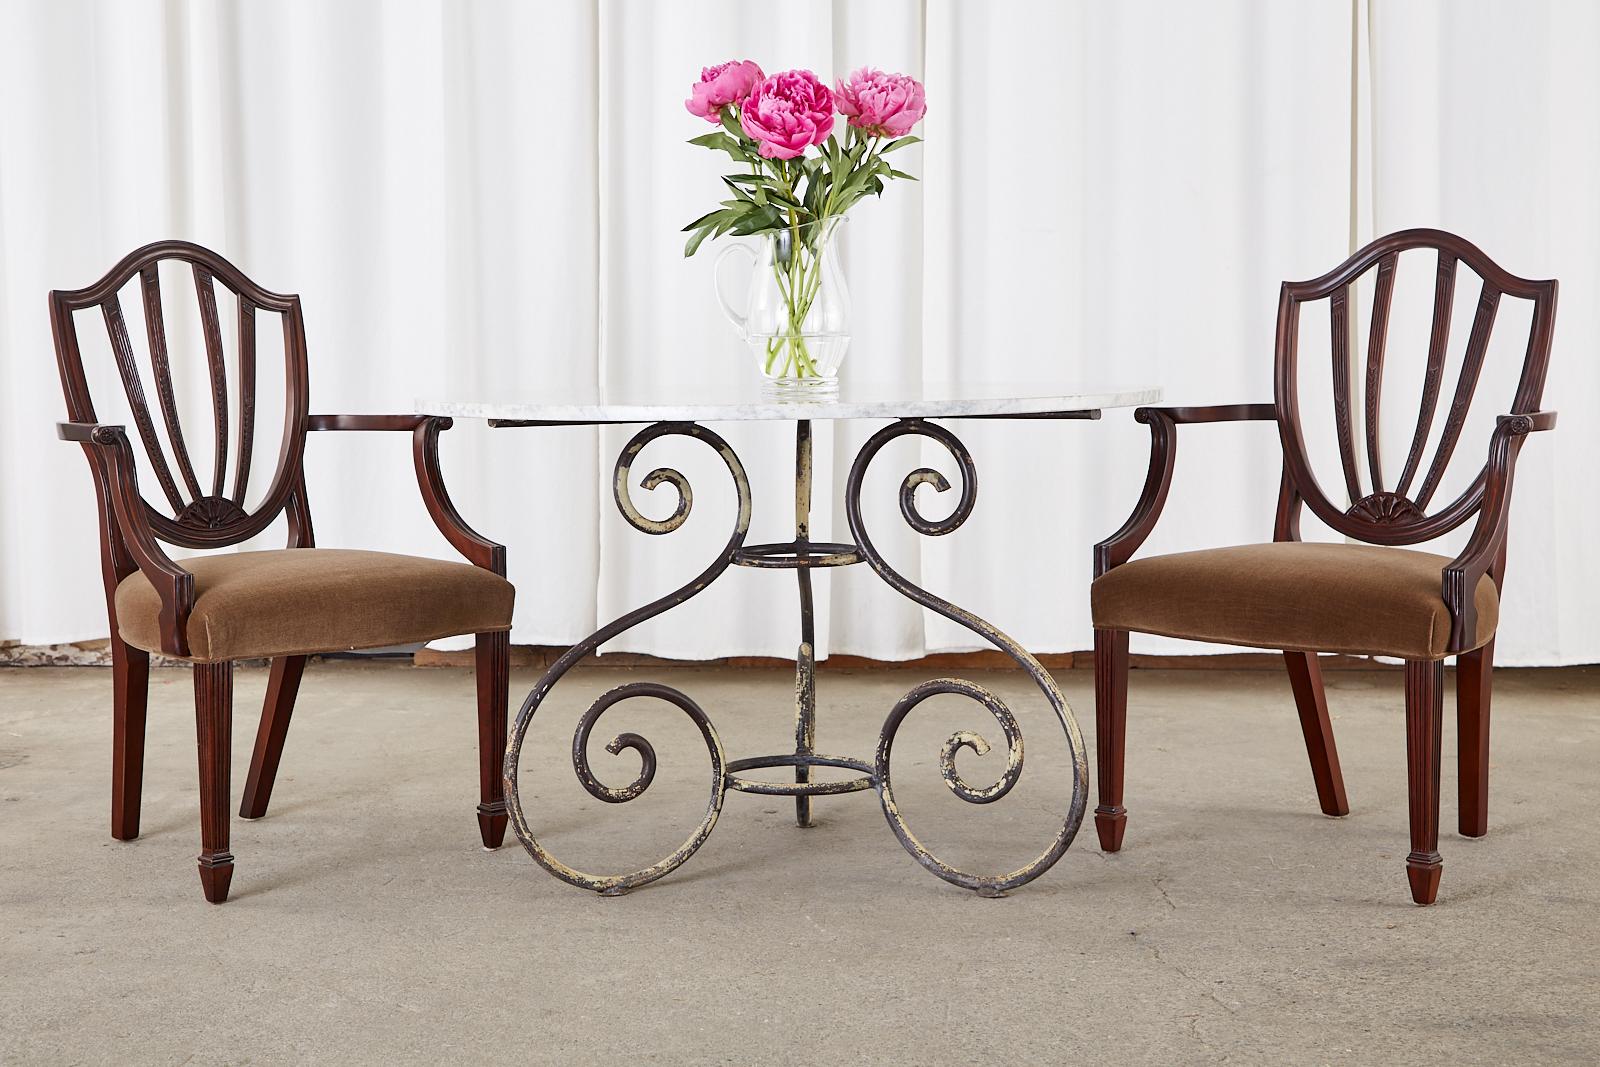 Distinctive set of mahogany dining chairs made by Baker from the historic Charleston collection. The chairs feature on Hepplewhite style shield back frame conjoined to gracefully curved serpentine arms. The set consists of two armchairs and four